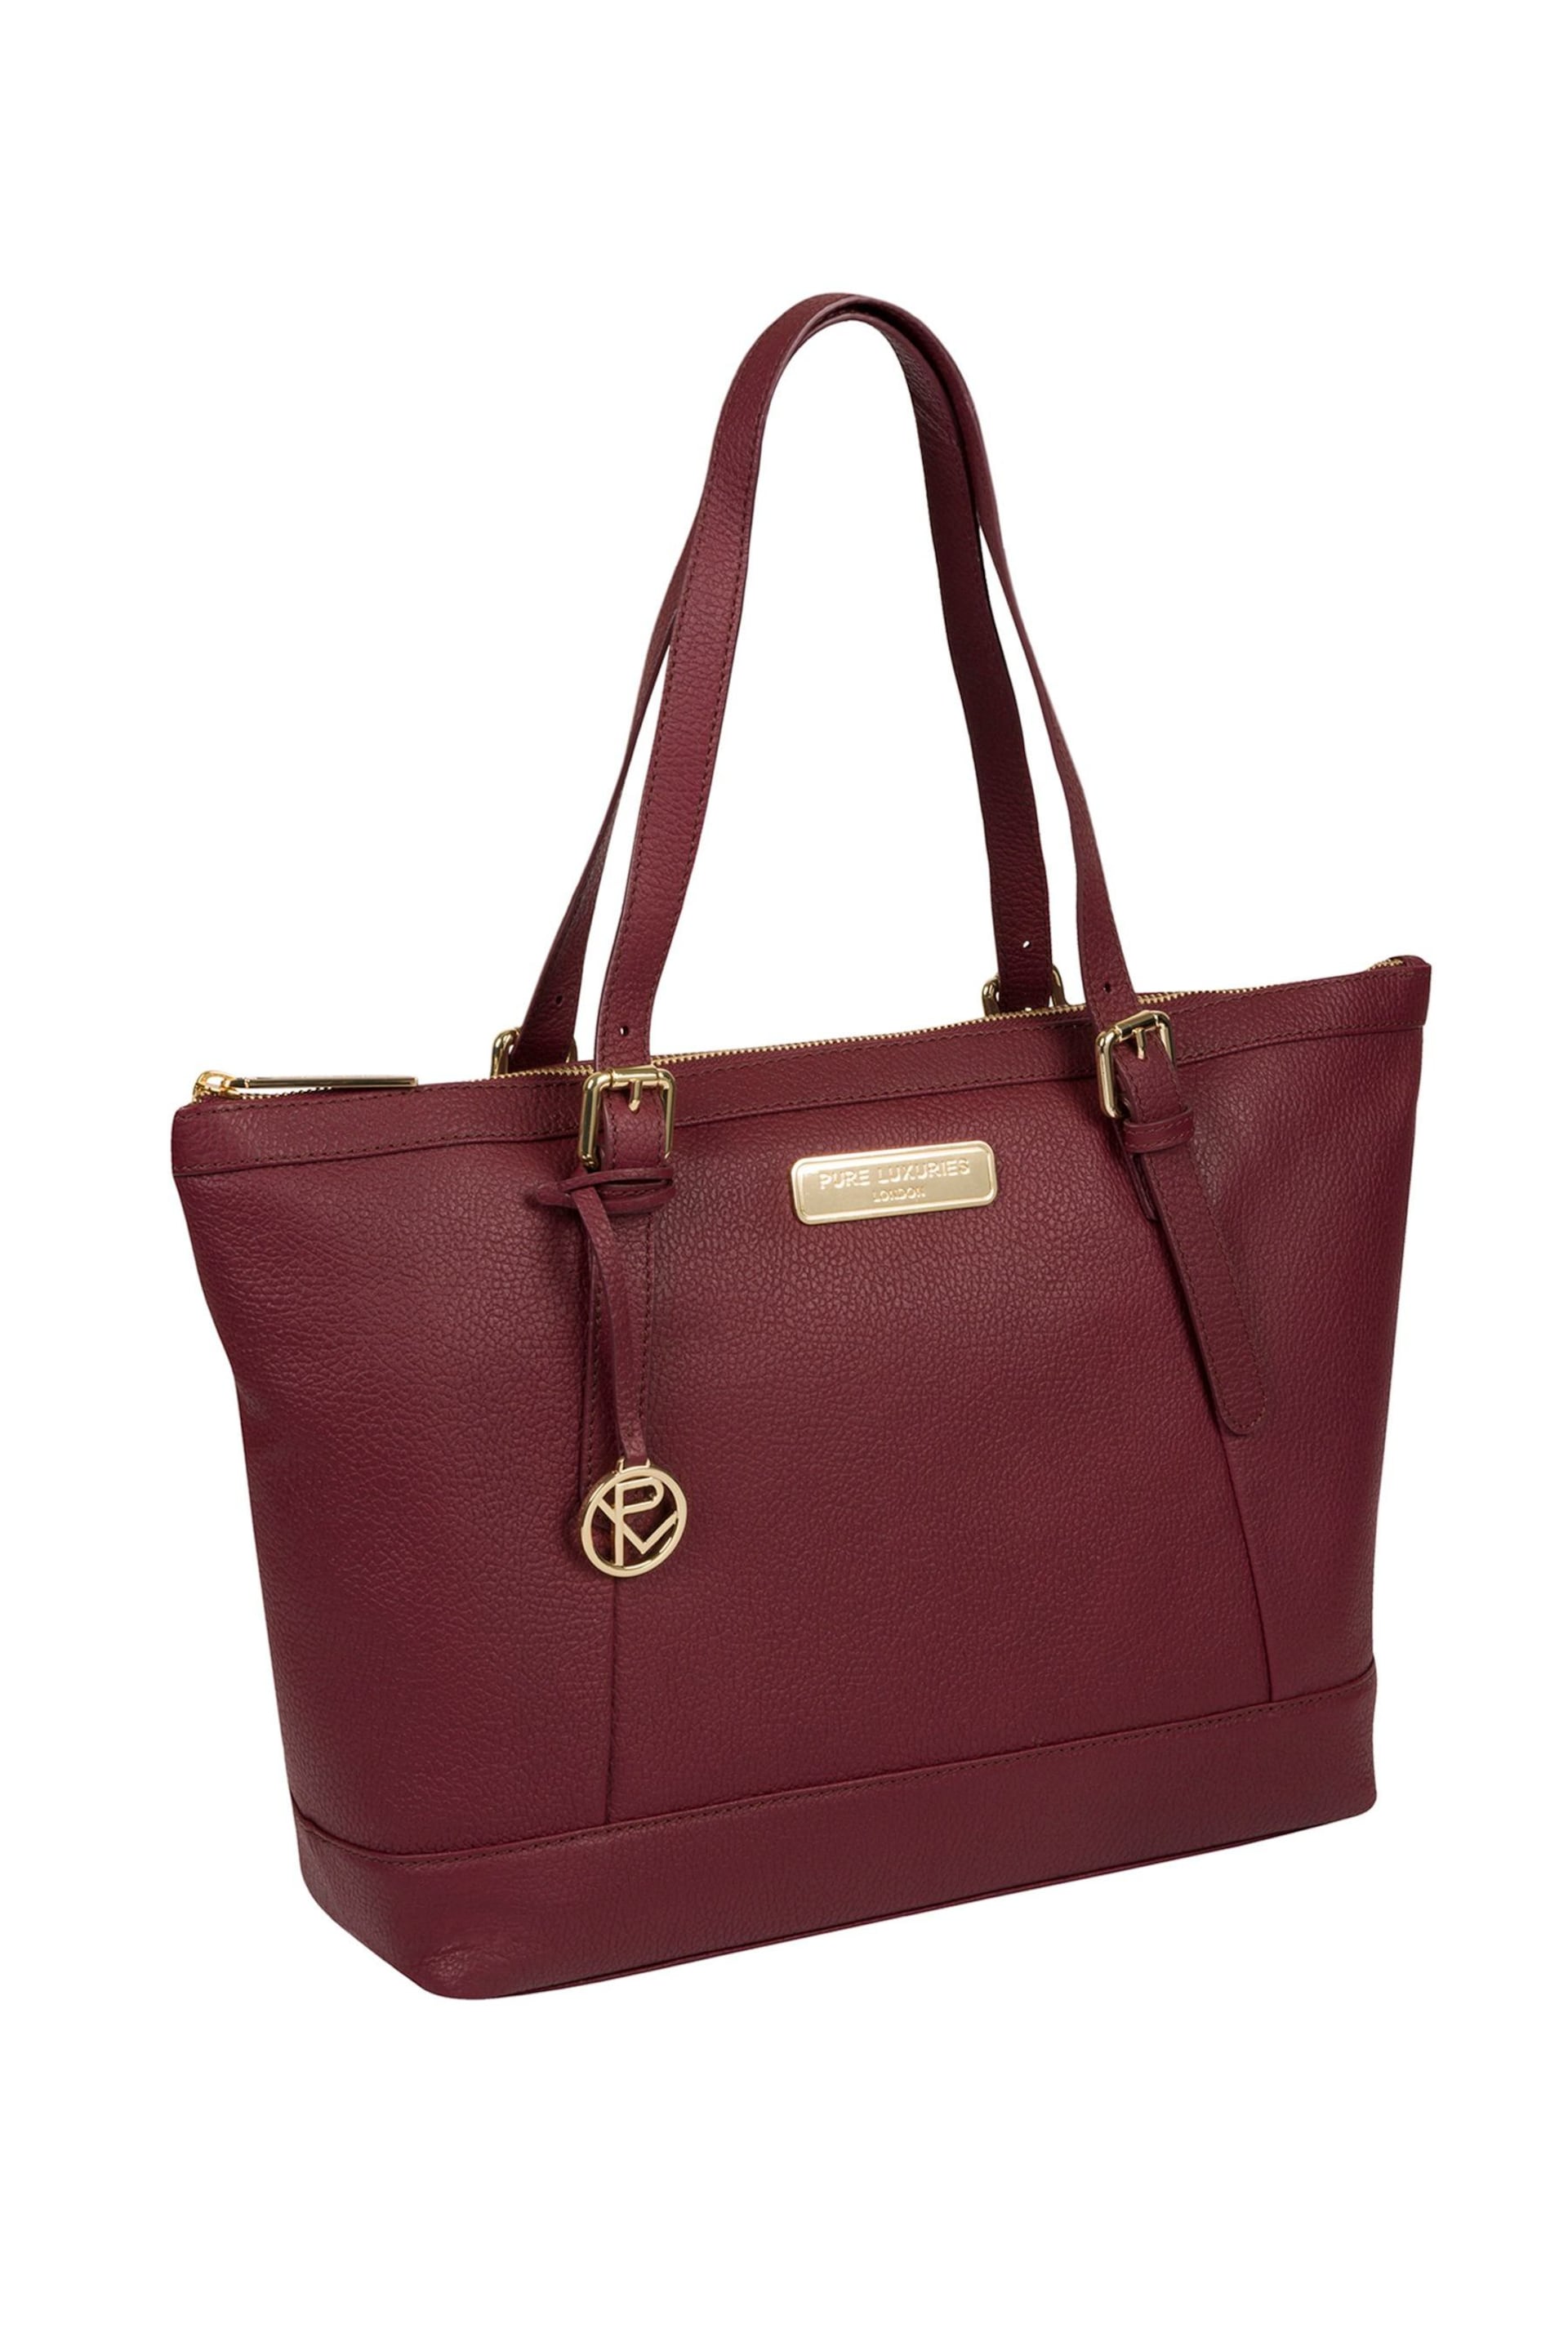 Pure Luxuries London Emily Leather Tote Bag - Image 3 of 5